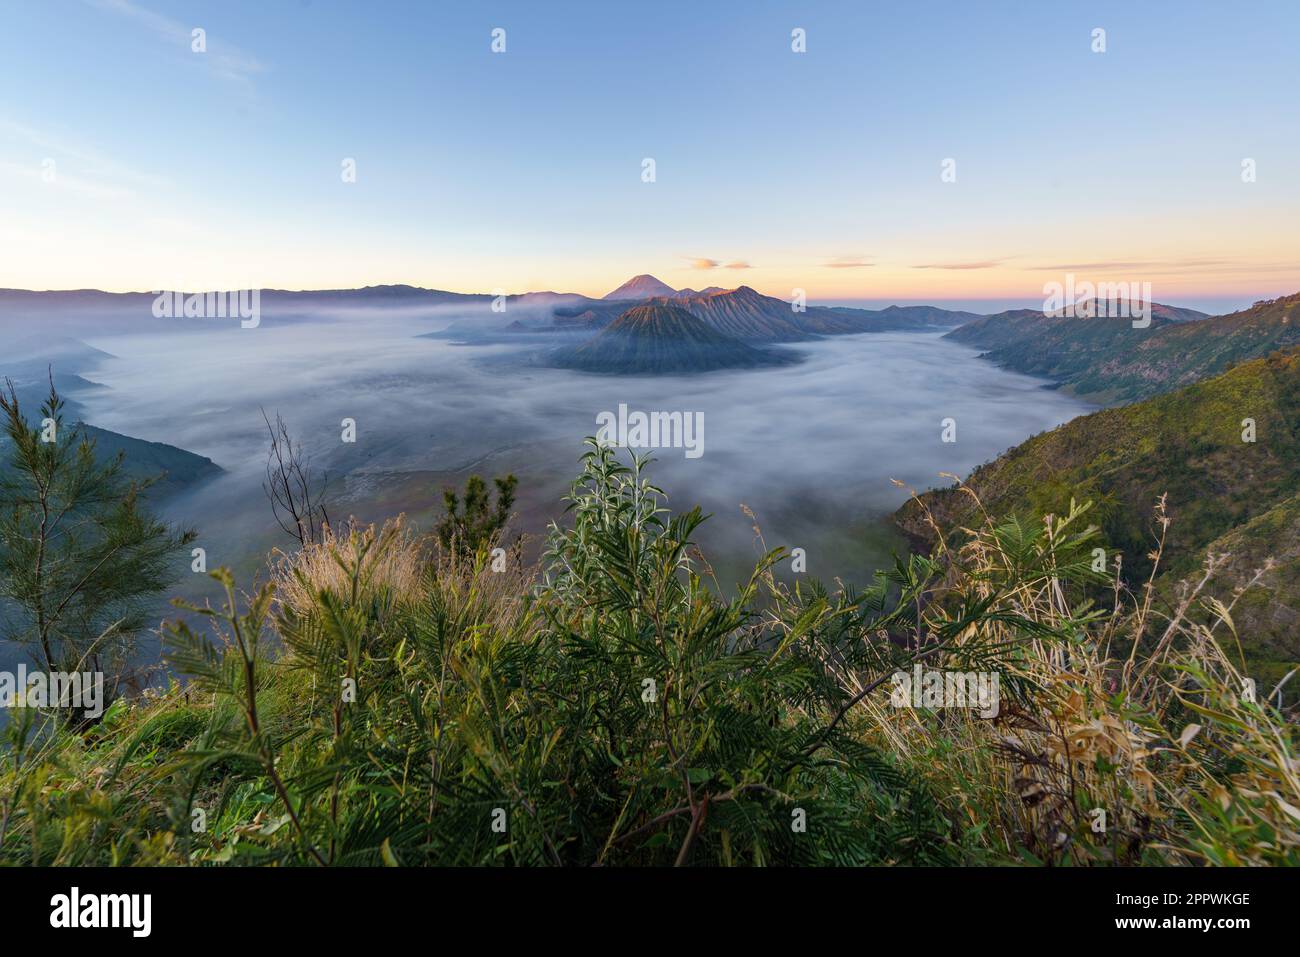 Aerial view of Mt Bromo and rural landscape at sunrise, Indonesia Stock Photo